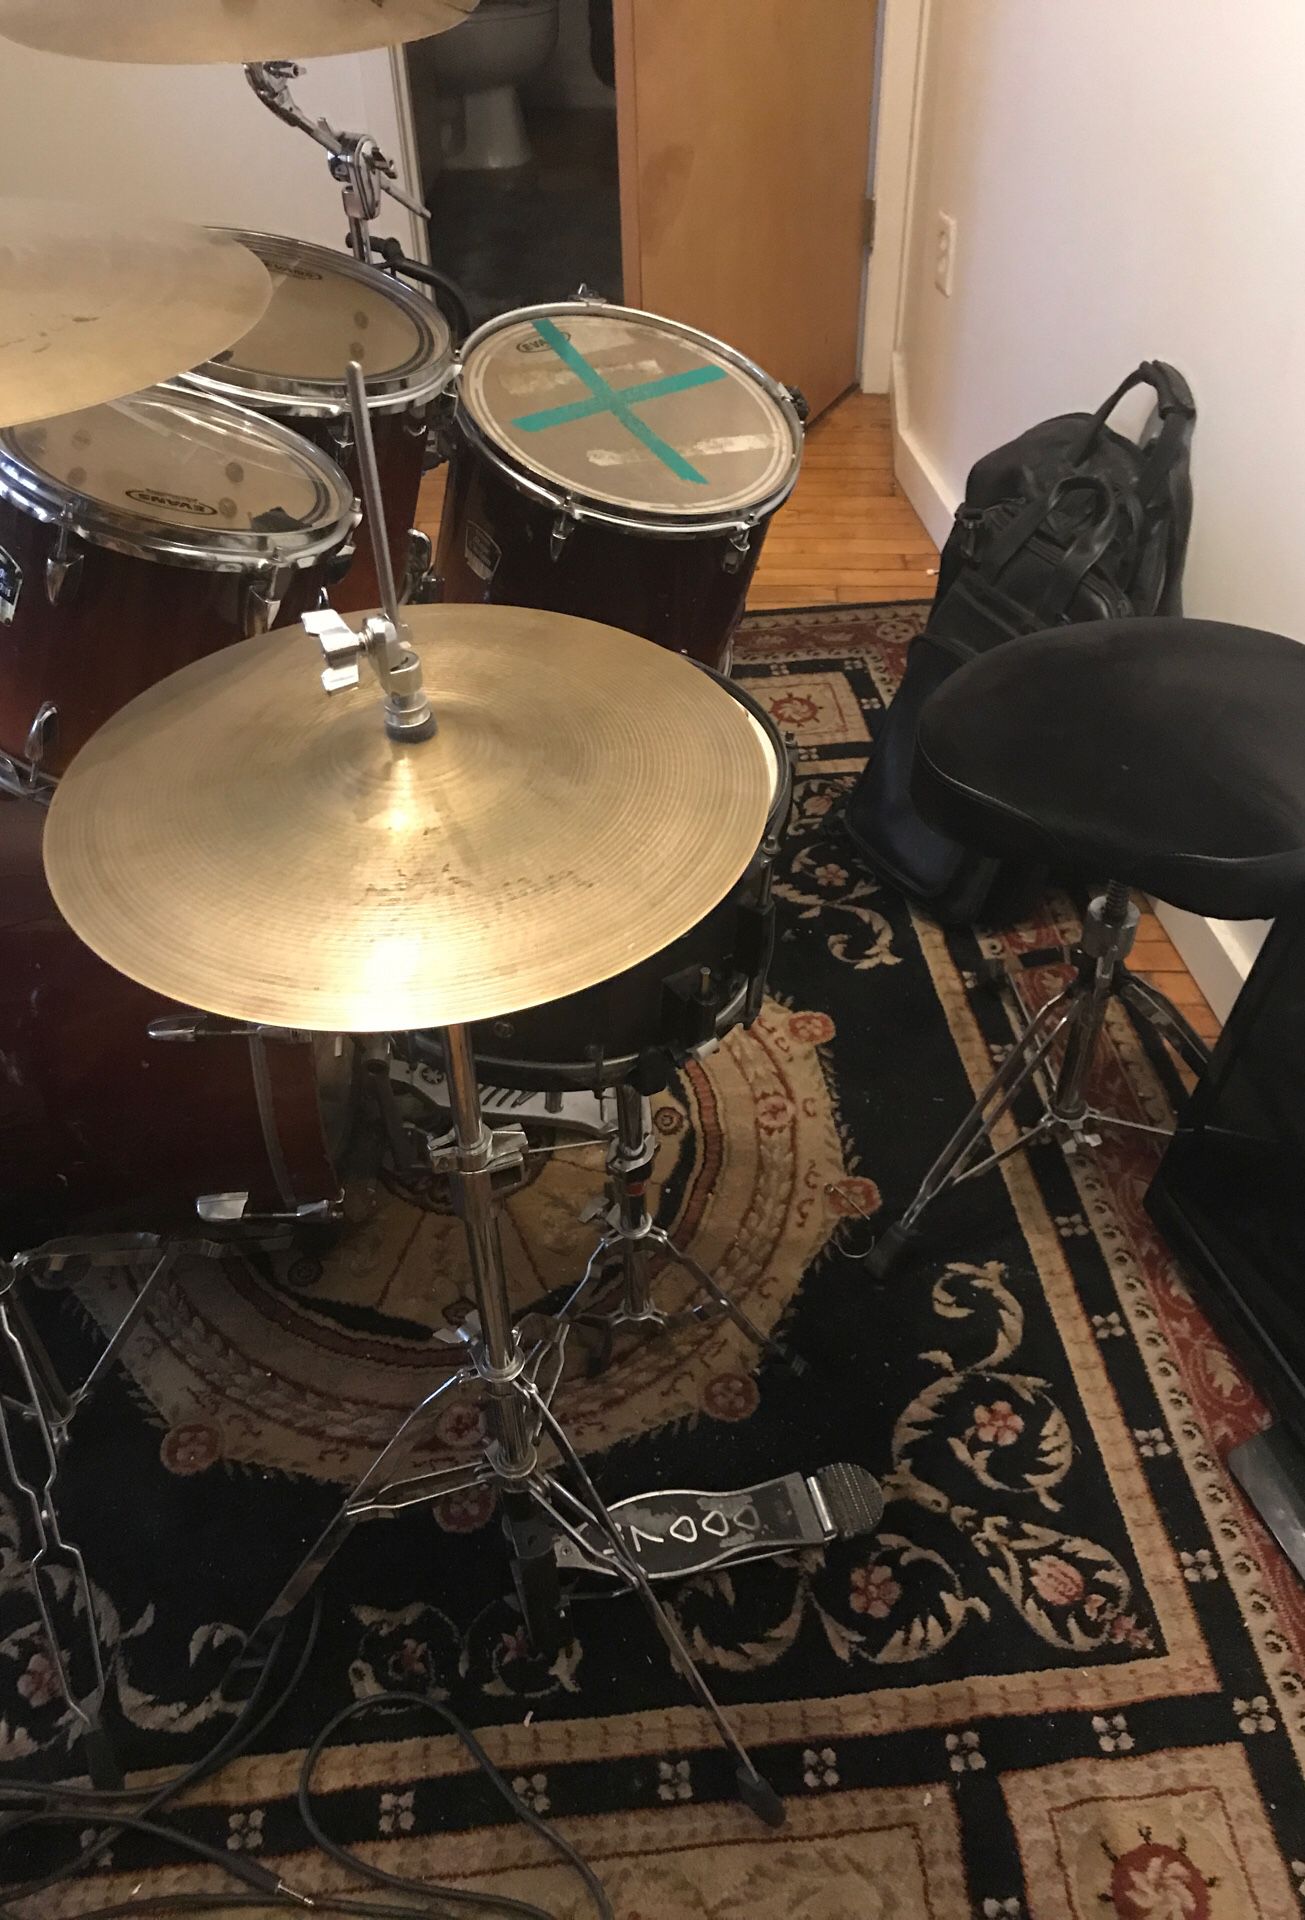 Drums for sell really good condition Yamaha stage customs advantage set had it for a few years asking $1000 comes with bags also